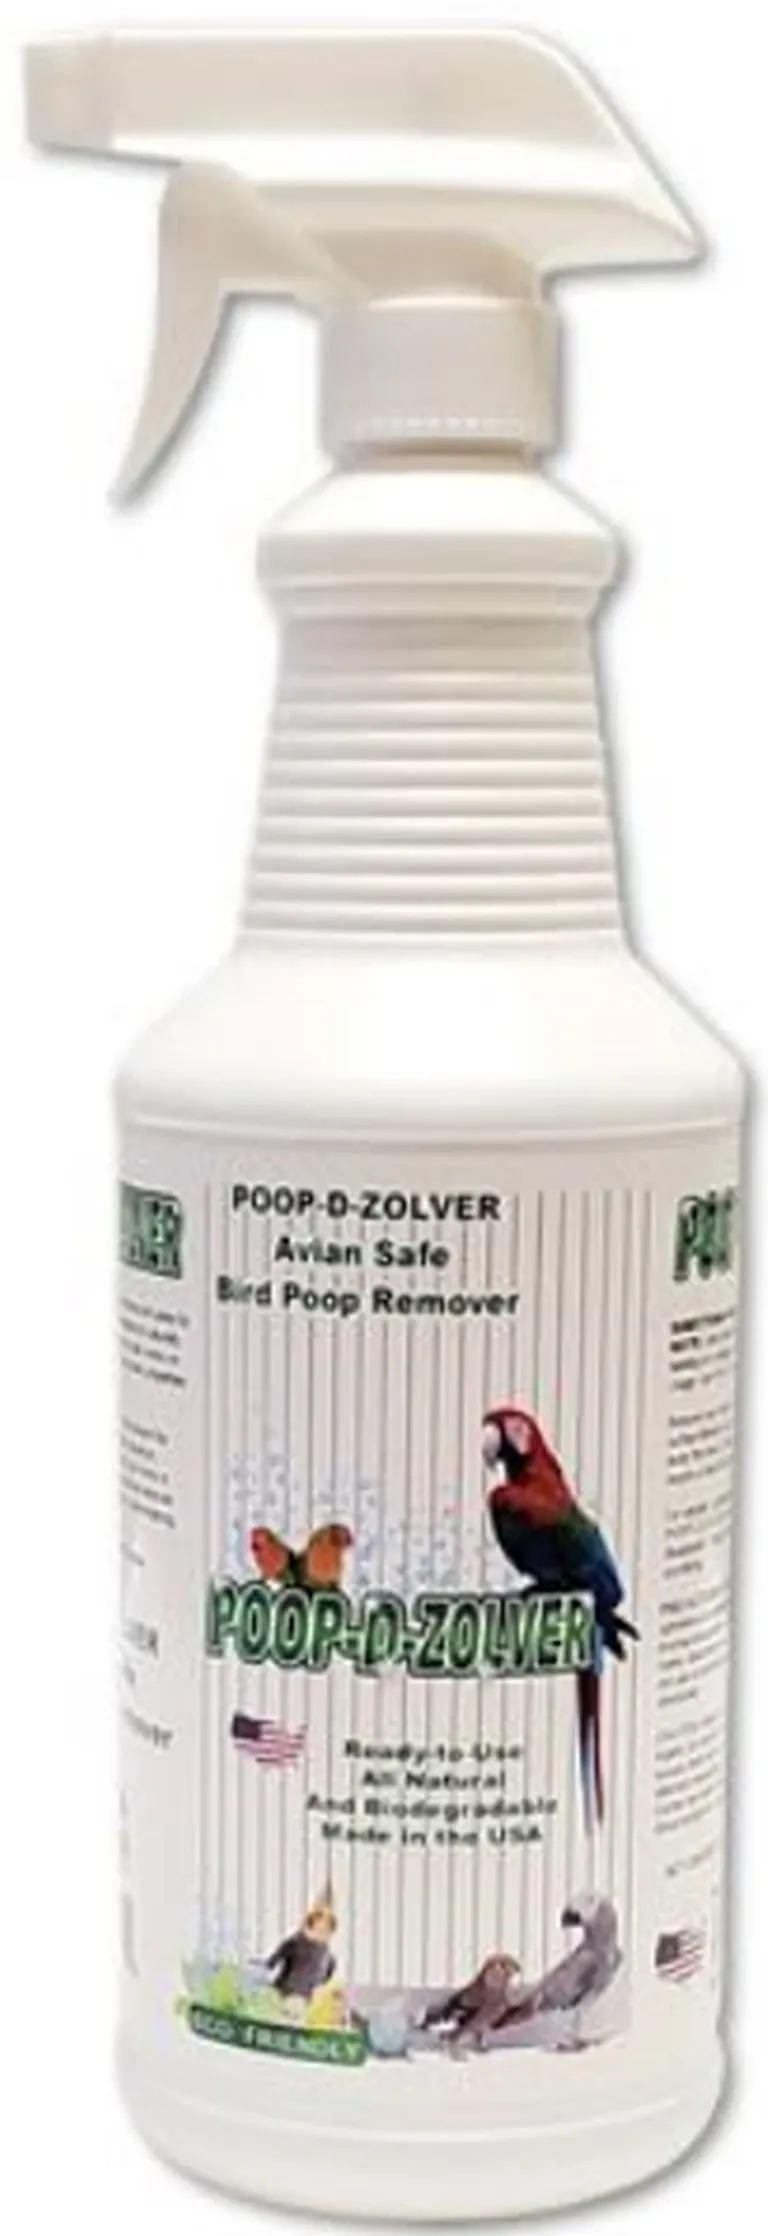 AE Cage Company Poop D Zolver Bird Poop Remover Lime Coconut Scent Photo 2